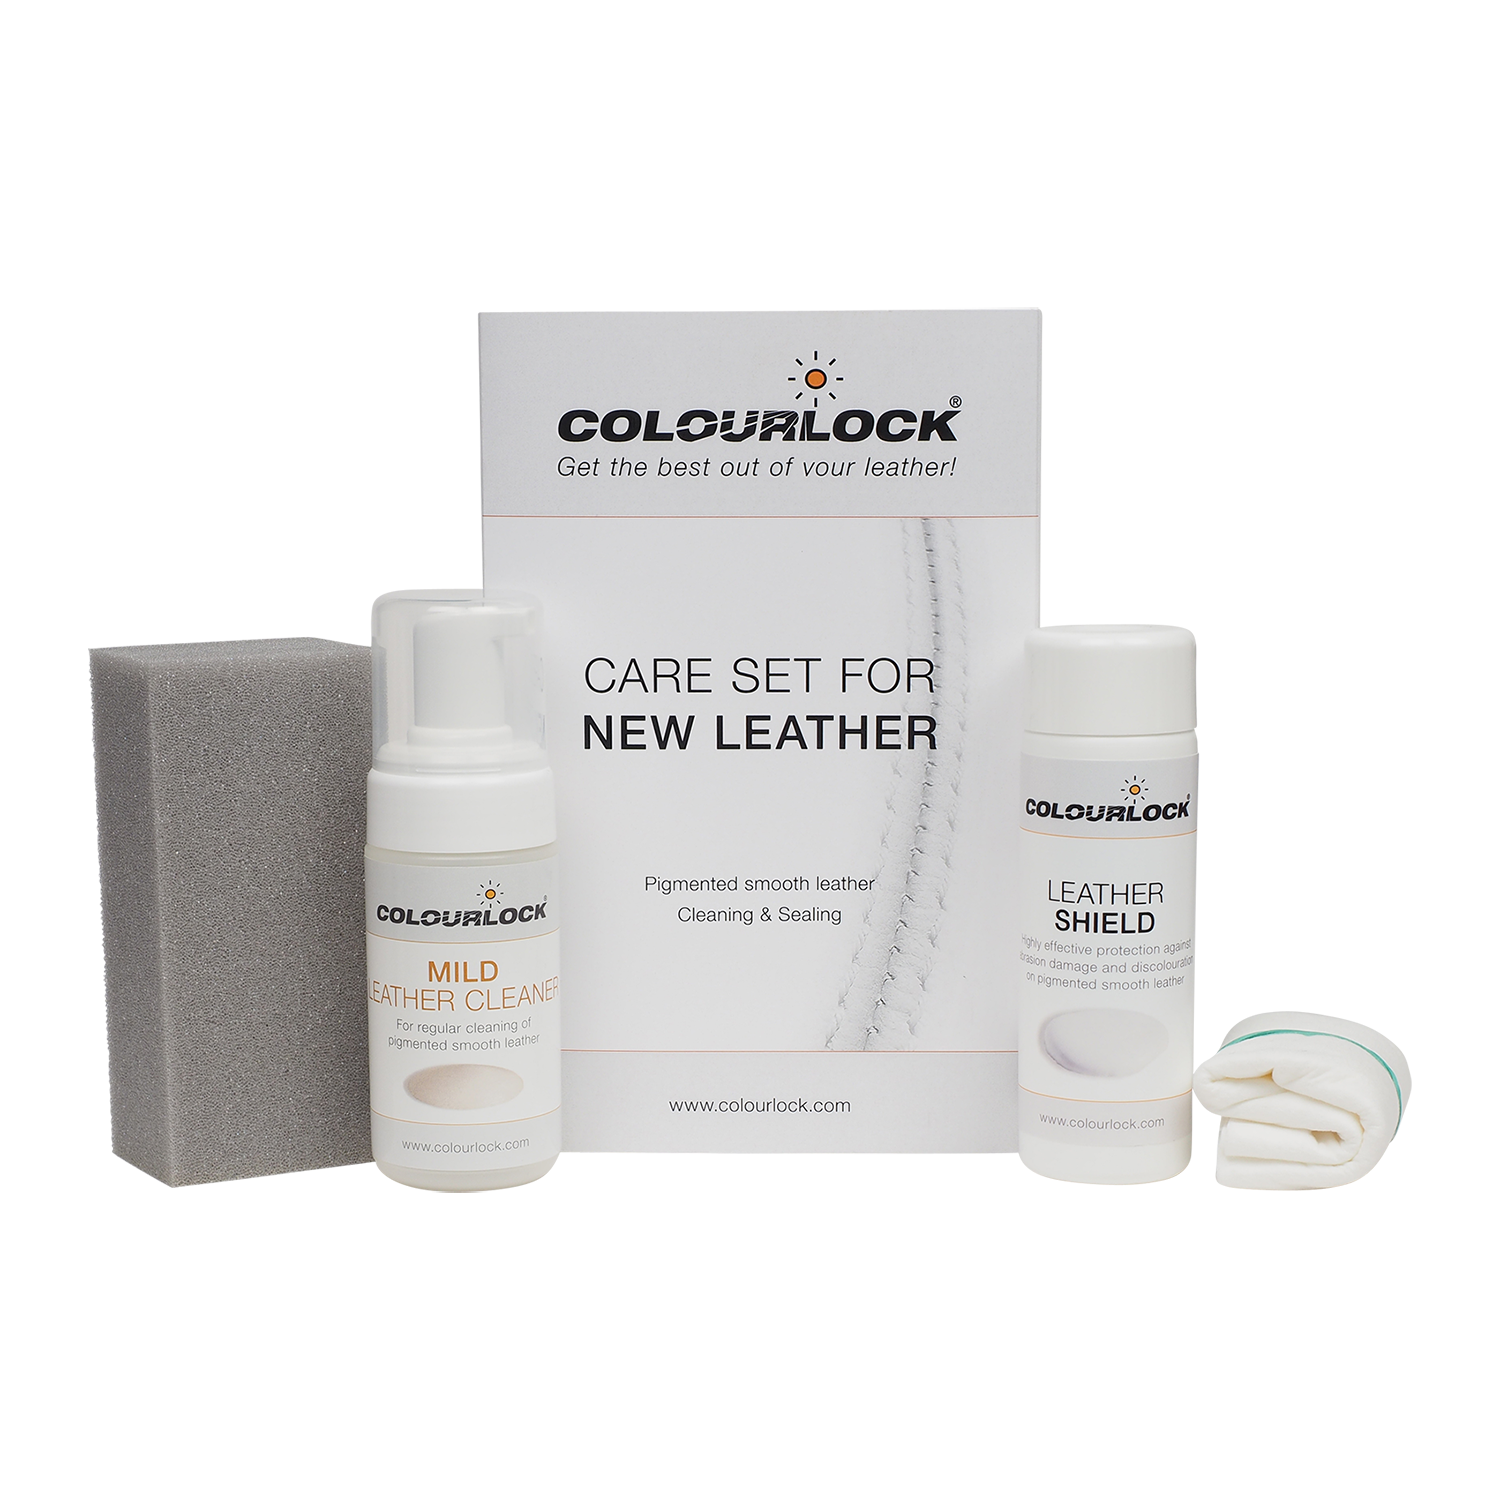 Colourlock Leather Shield Clean and Protect Kit